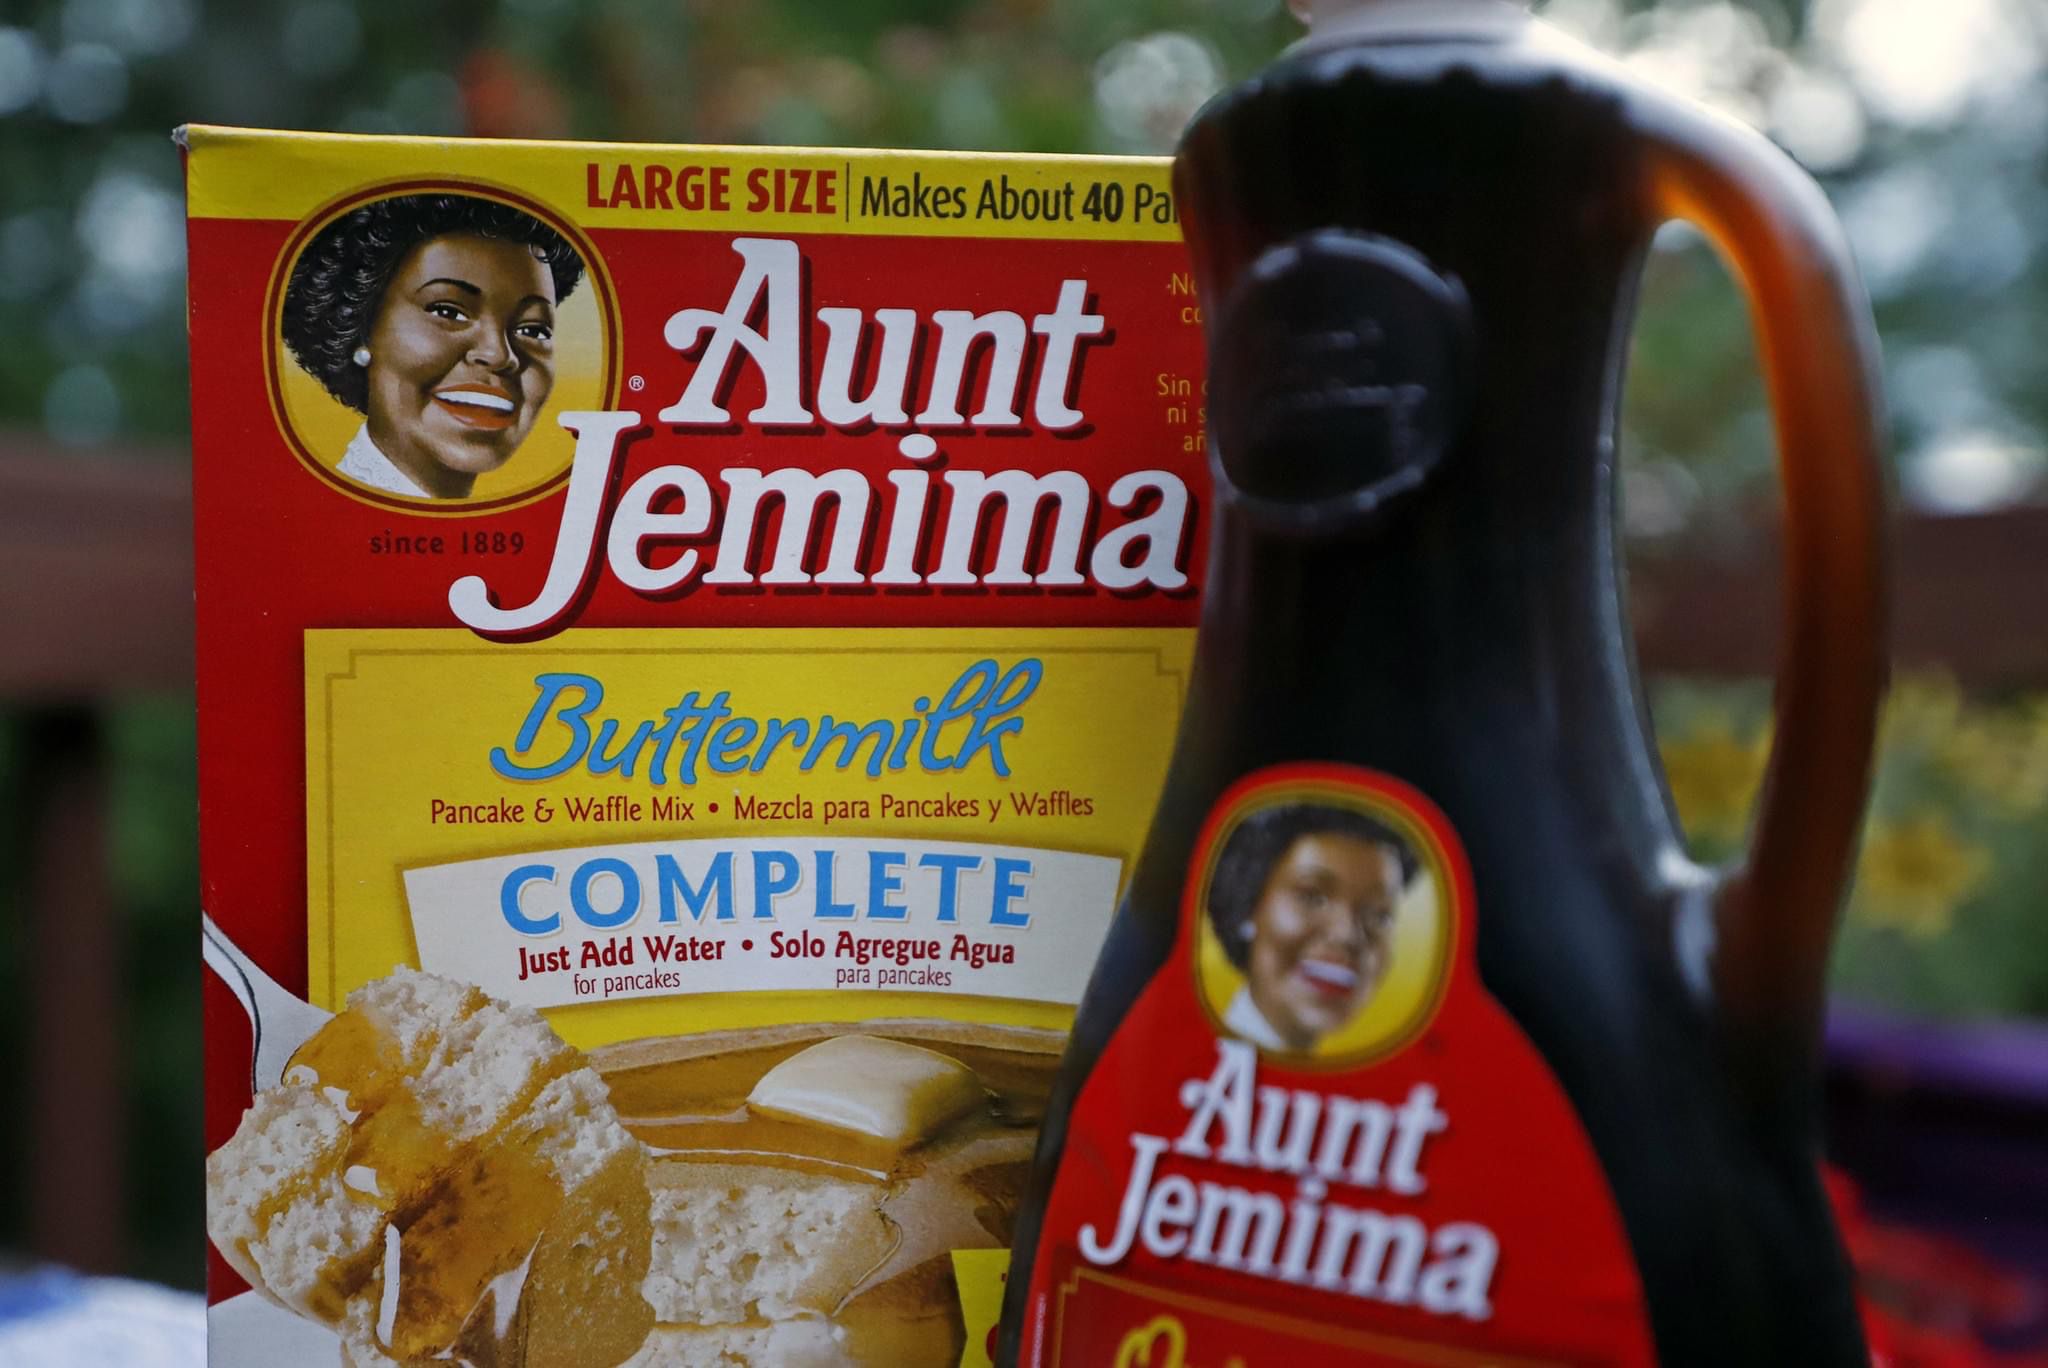 The announcement by Quaker Oats that their “Aunt Jemima” brand would be phased out in 2020 owing to the Black Lives Matter movement created quite a commotion.